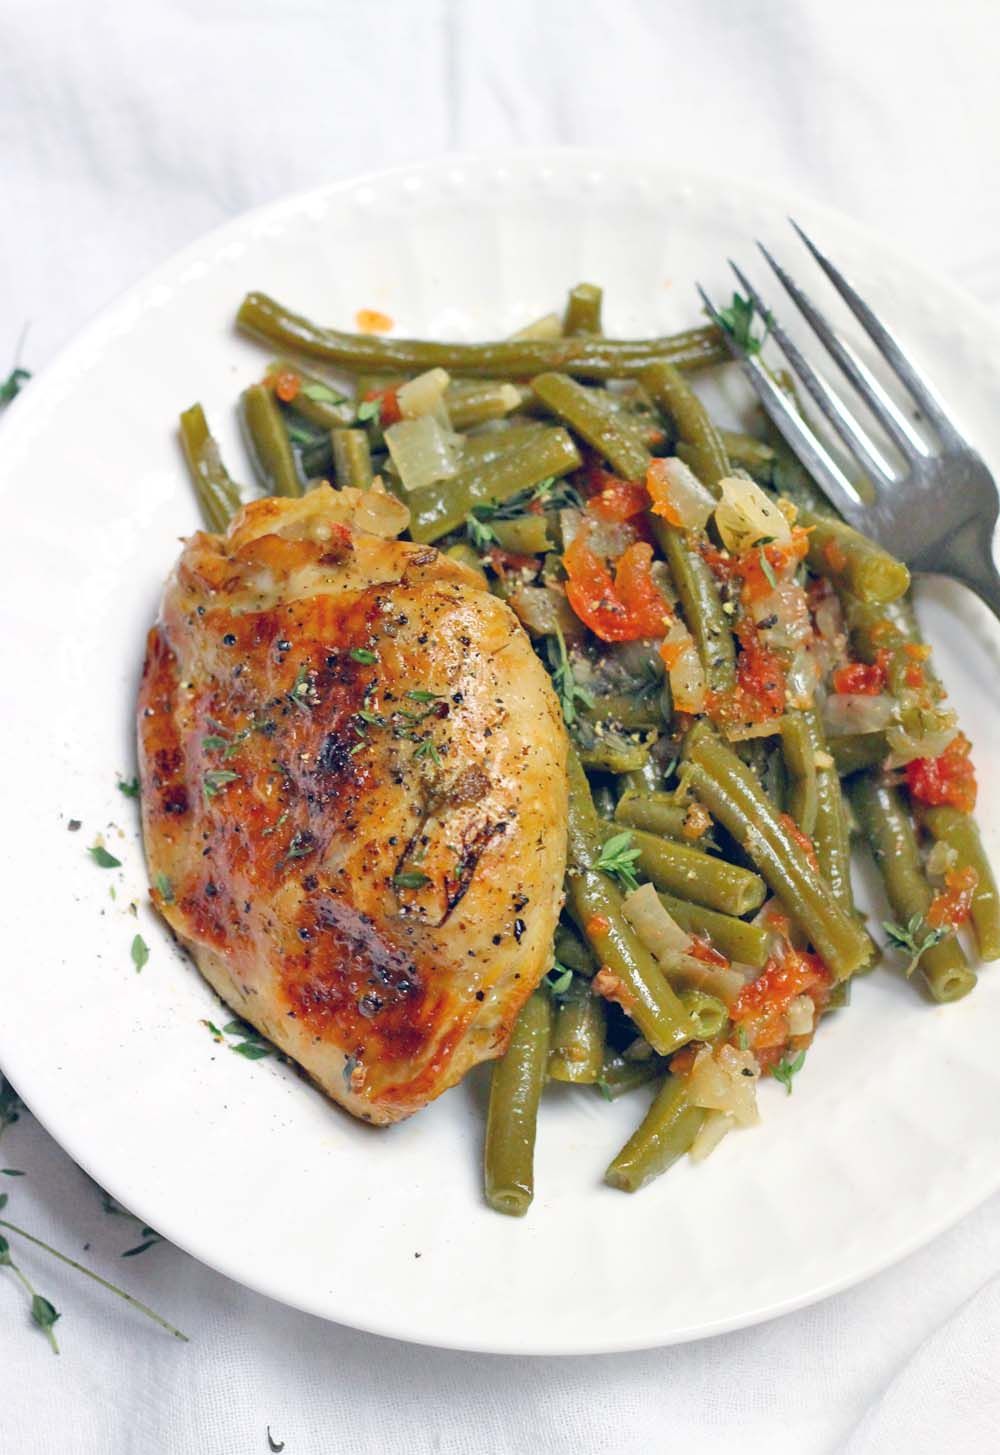 Slow Cooker Greek-Style Green Beans and Chicken Thighs -   23 whole 30 crockpot
 ideas